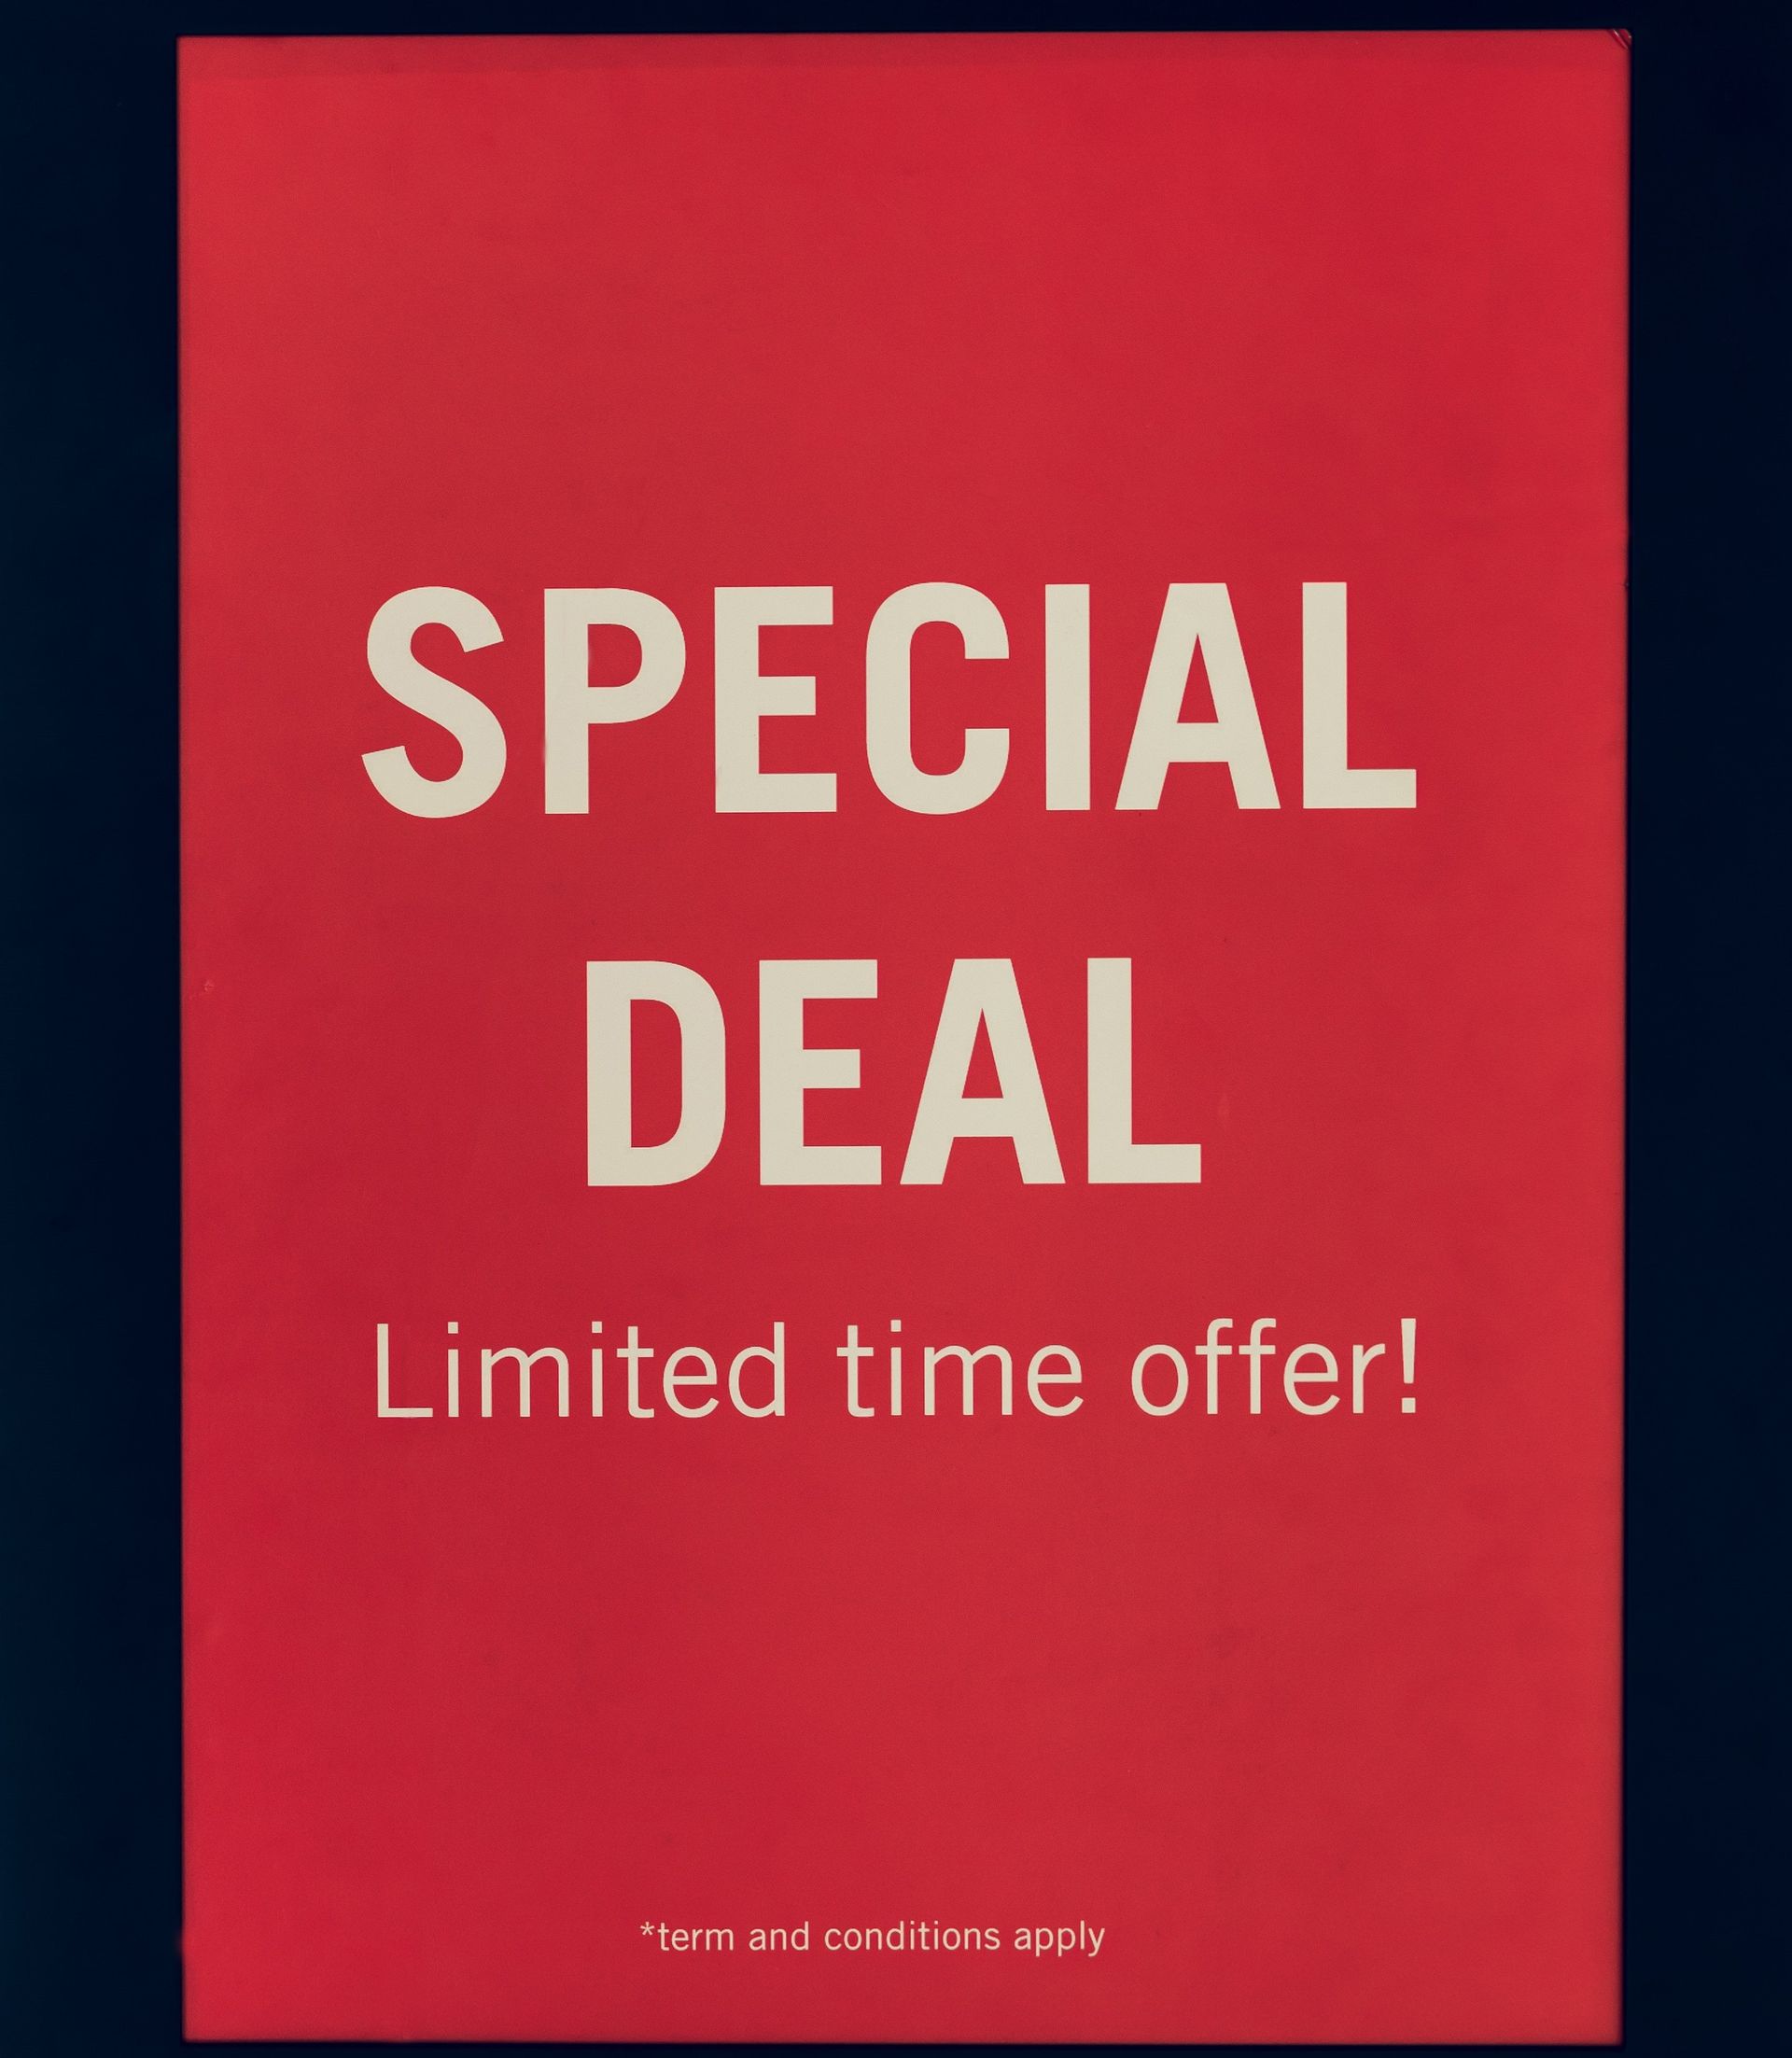 Be careful of special deals and offers